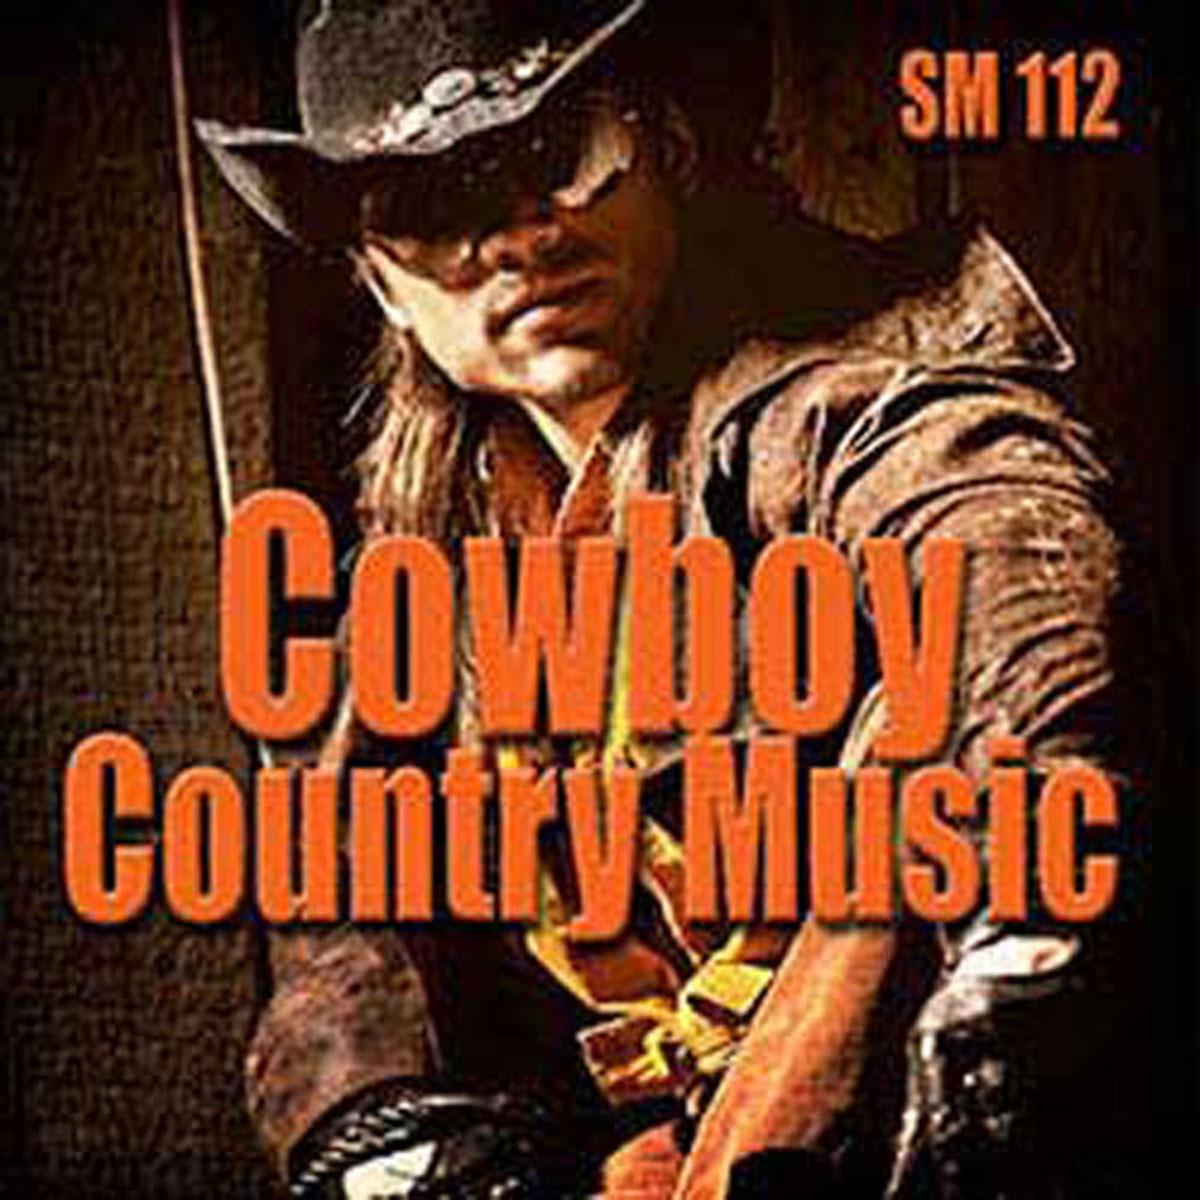 Image of Sound Ideas Royalty Free Music Cowboy Country Music Software